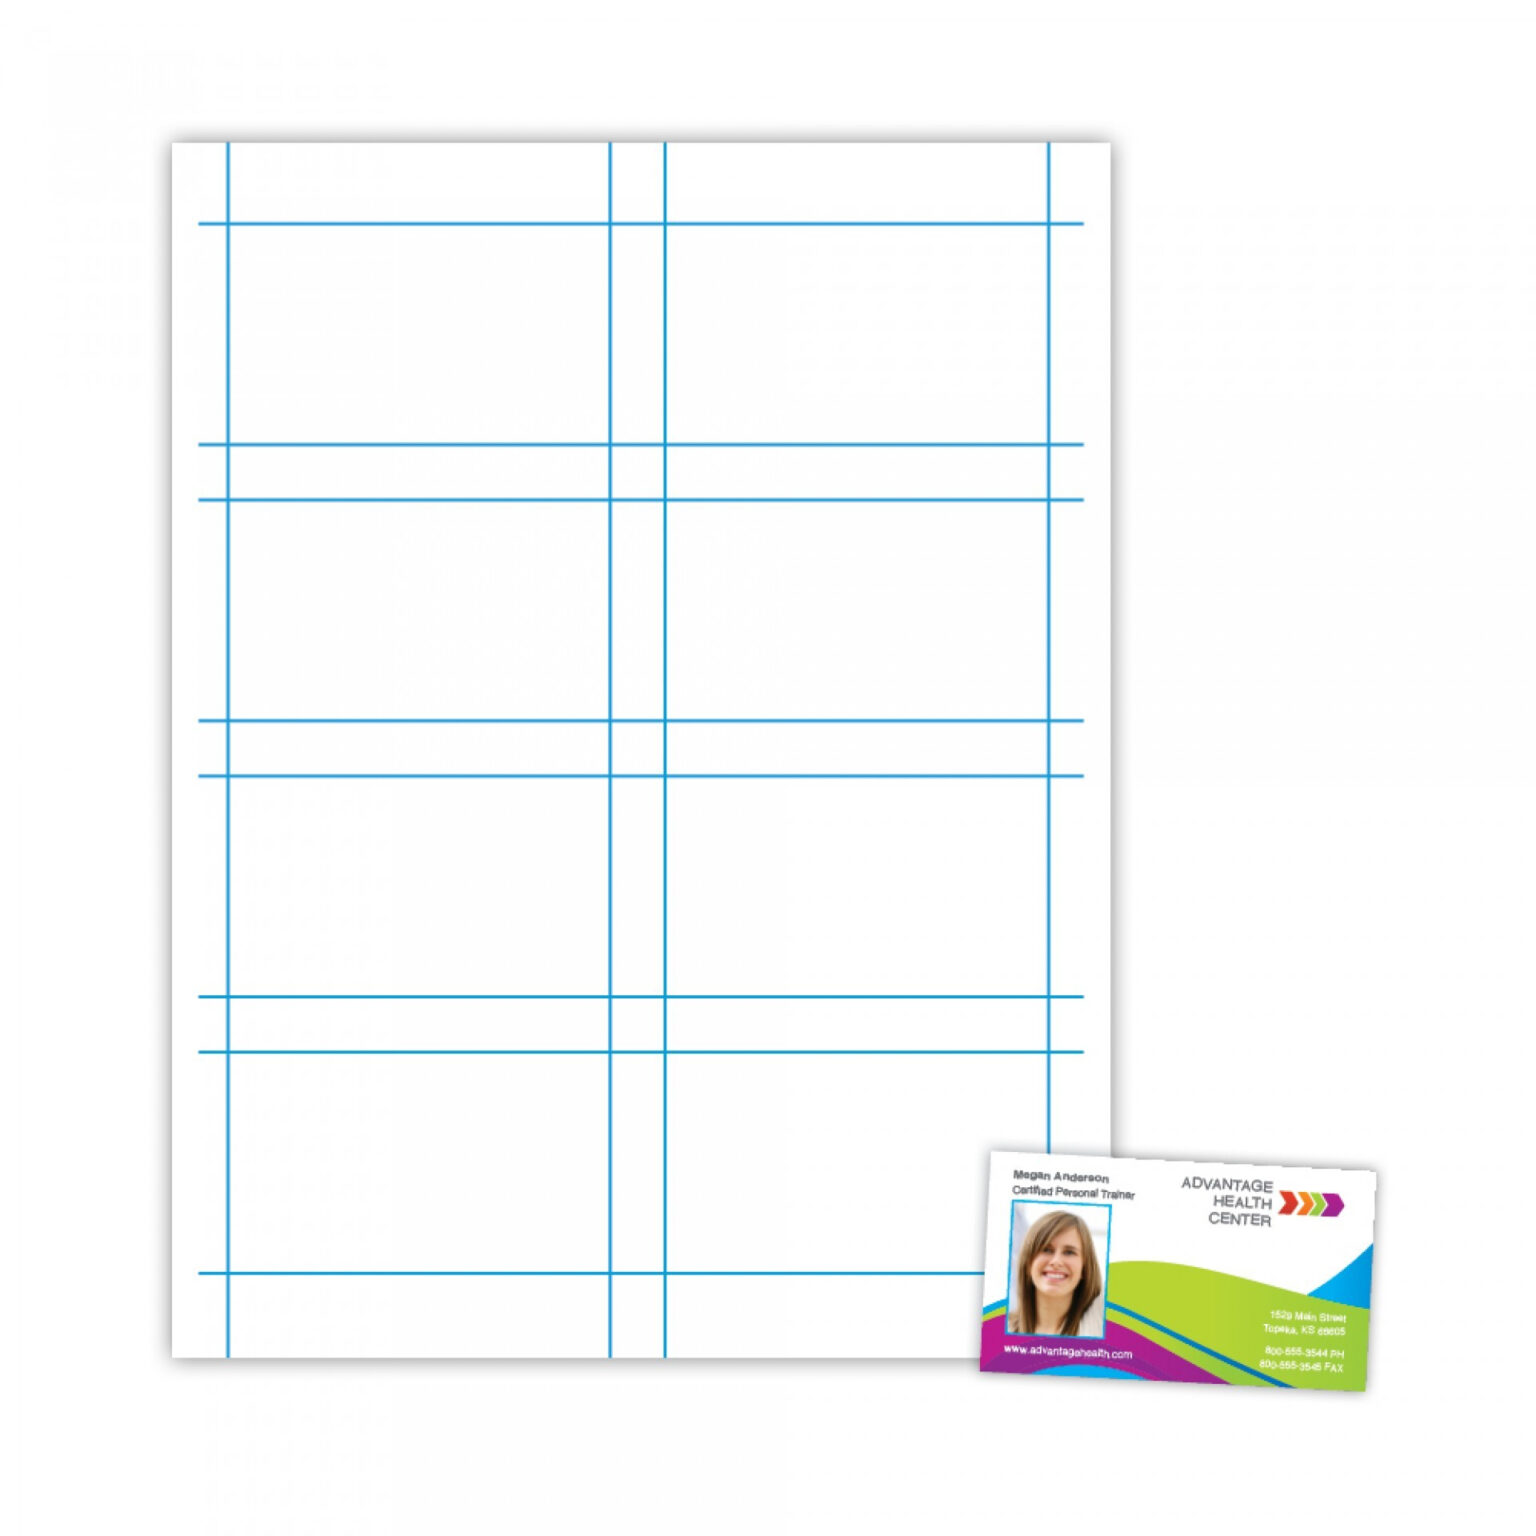 Standard Blank Business Card Template Word Mac Design within Free